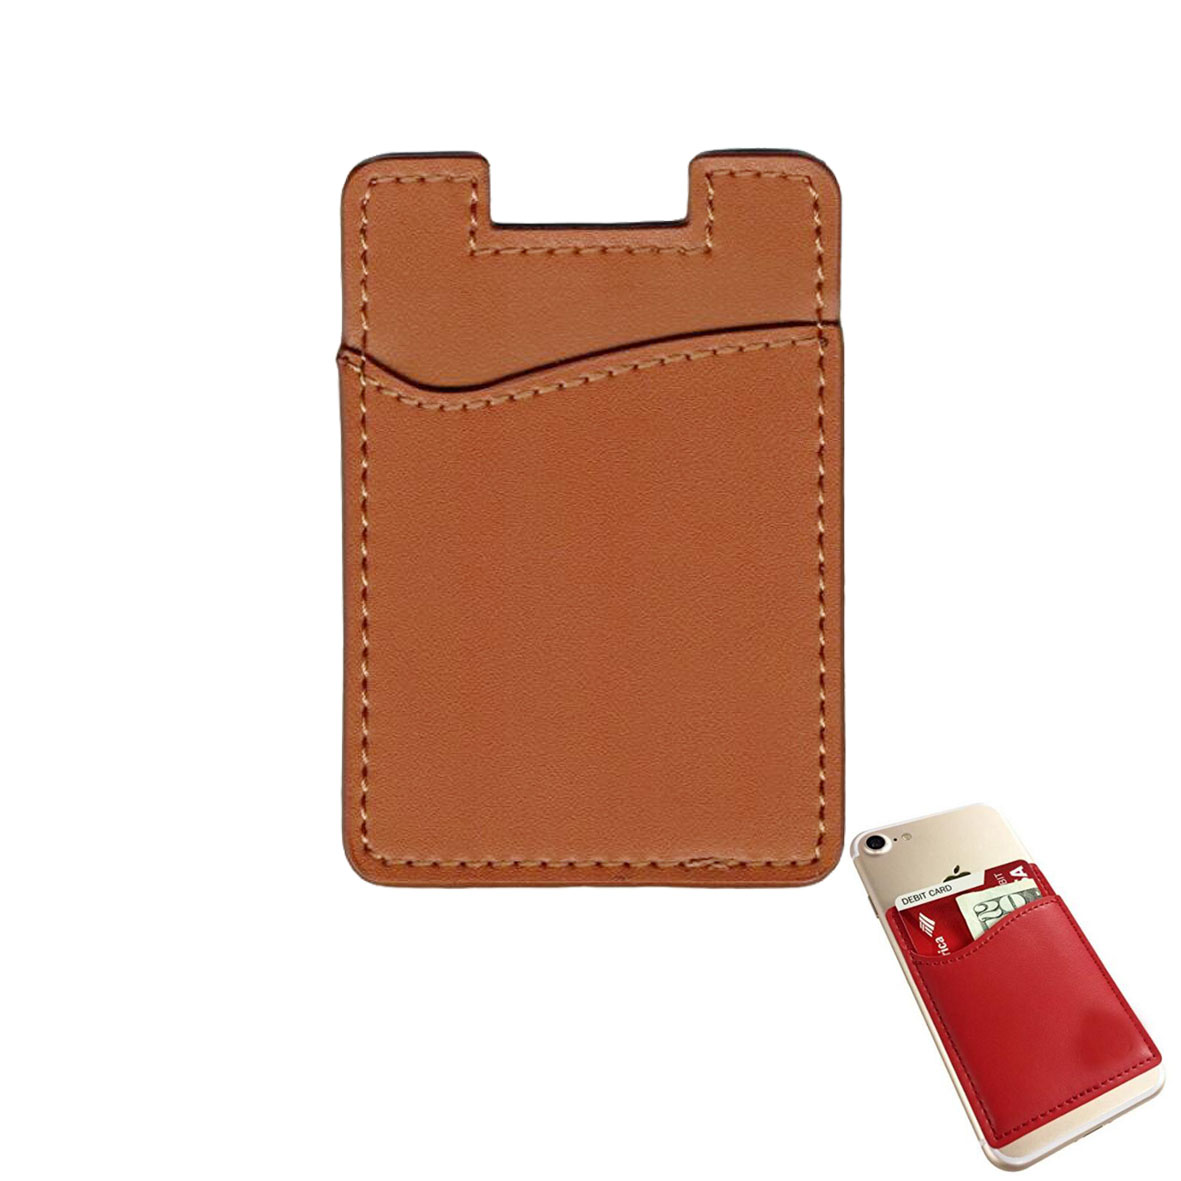 GL-AAA1340 Leatherete Adhesive Cell Phone Wallet